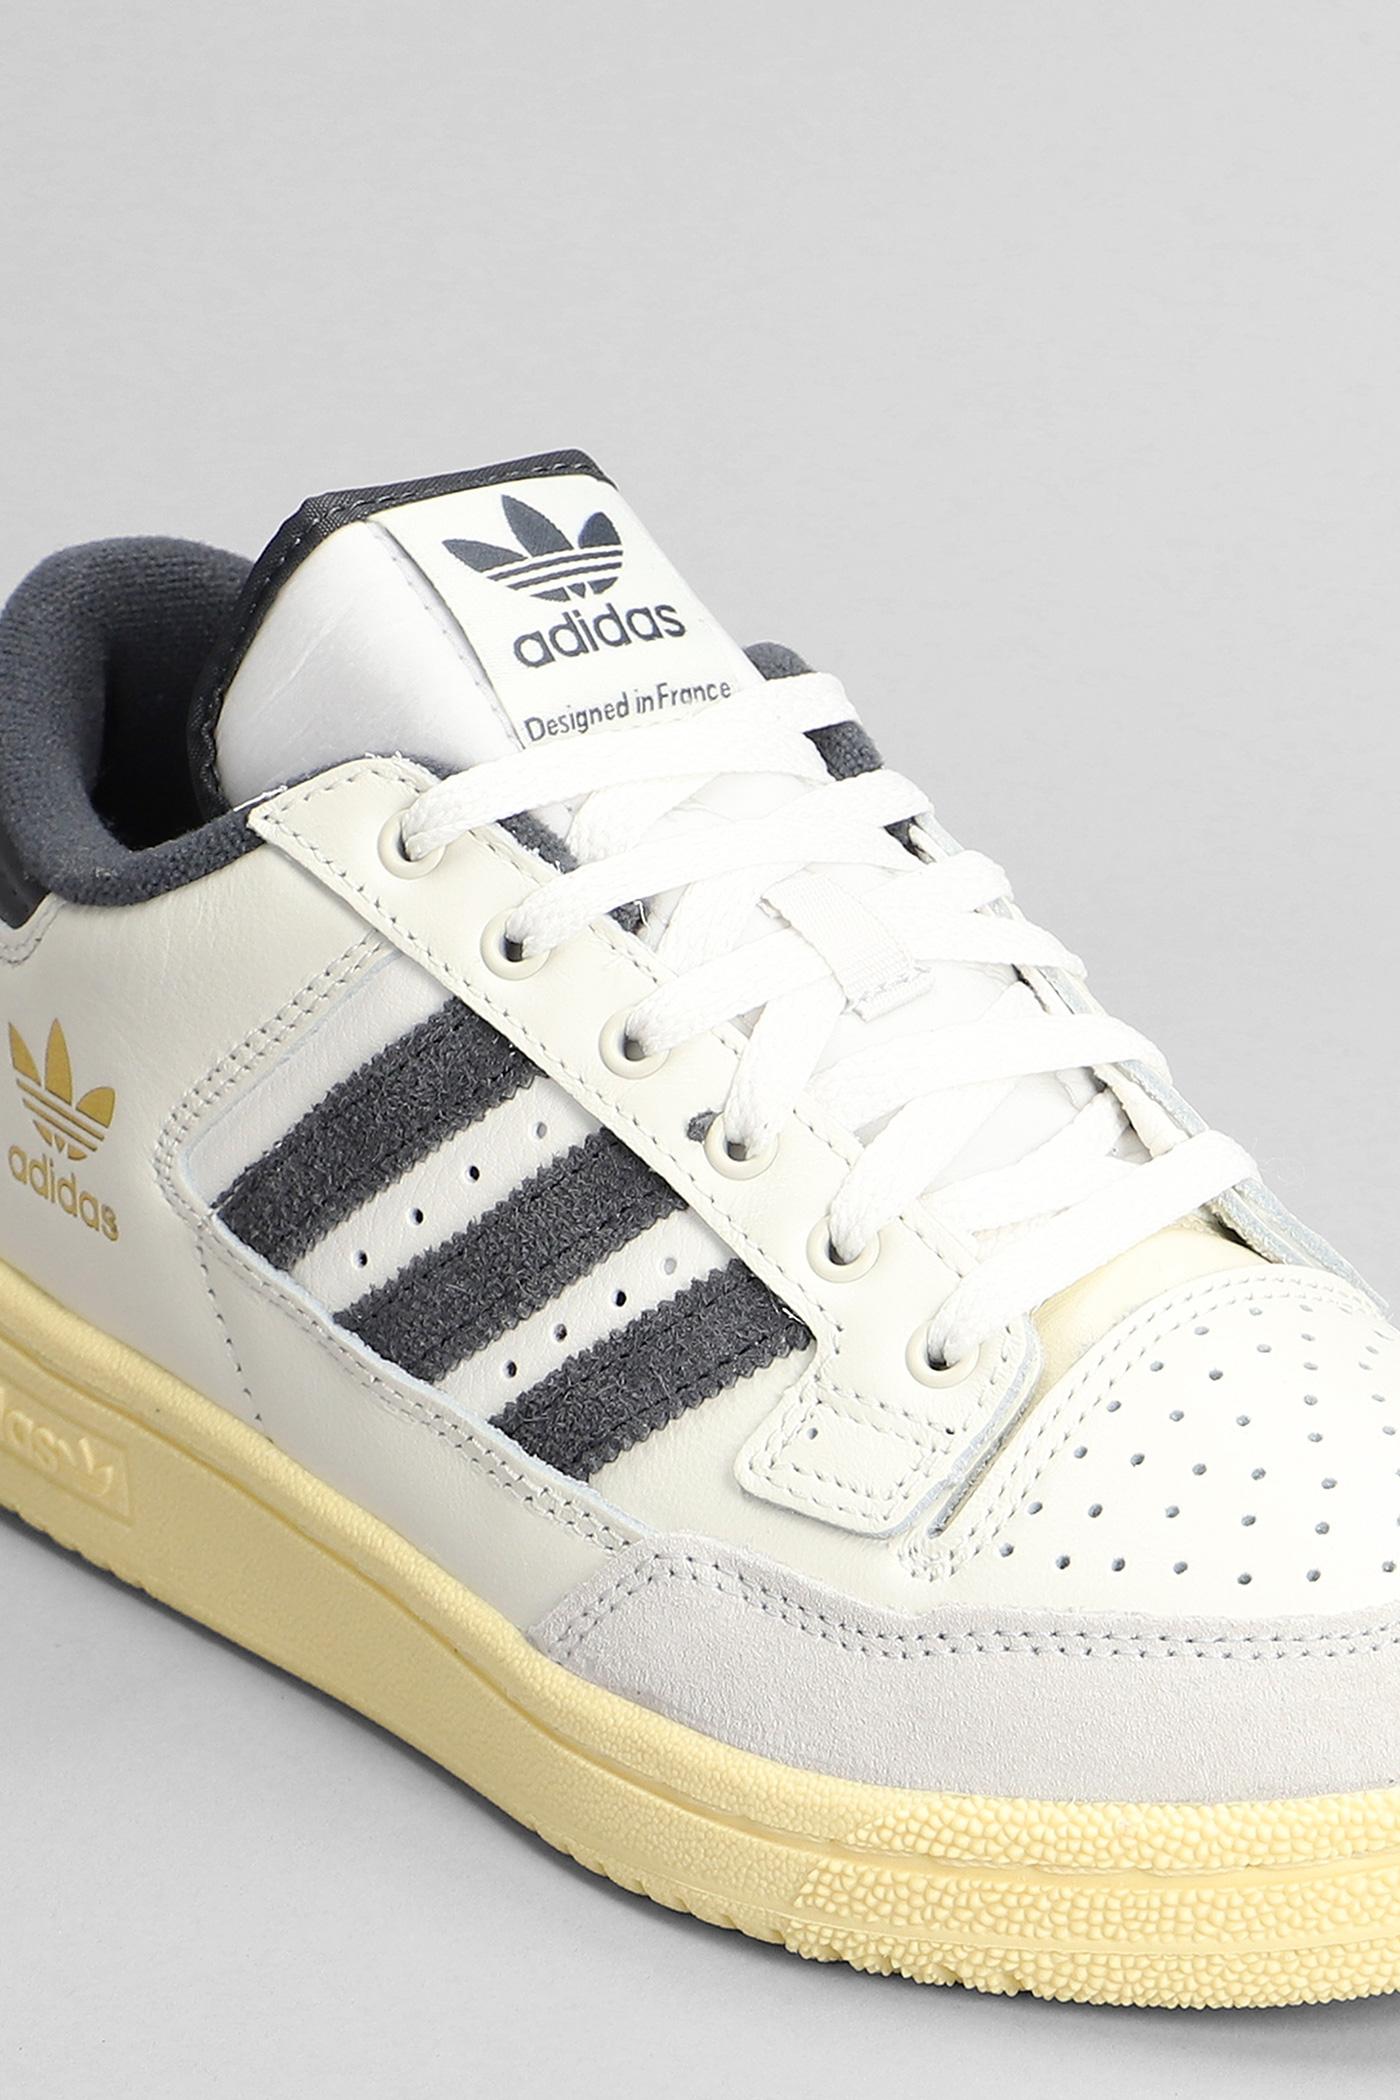 adidas Centennial 85 Low Sneakers In White Leather in Metallic | Lyst